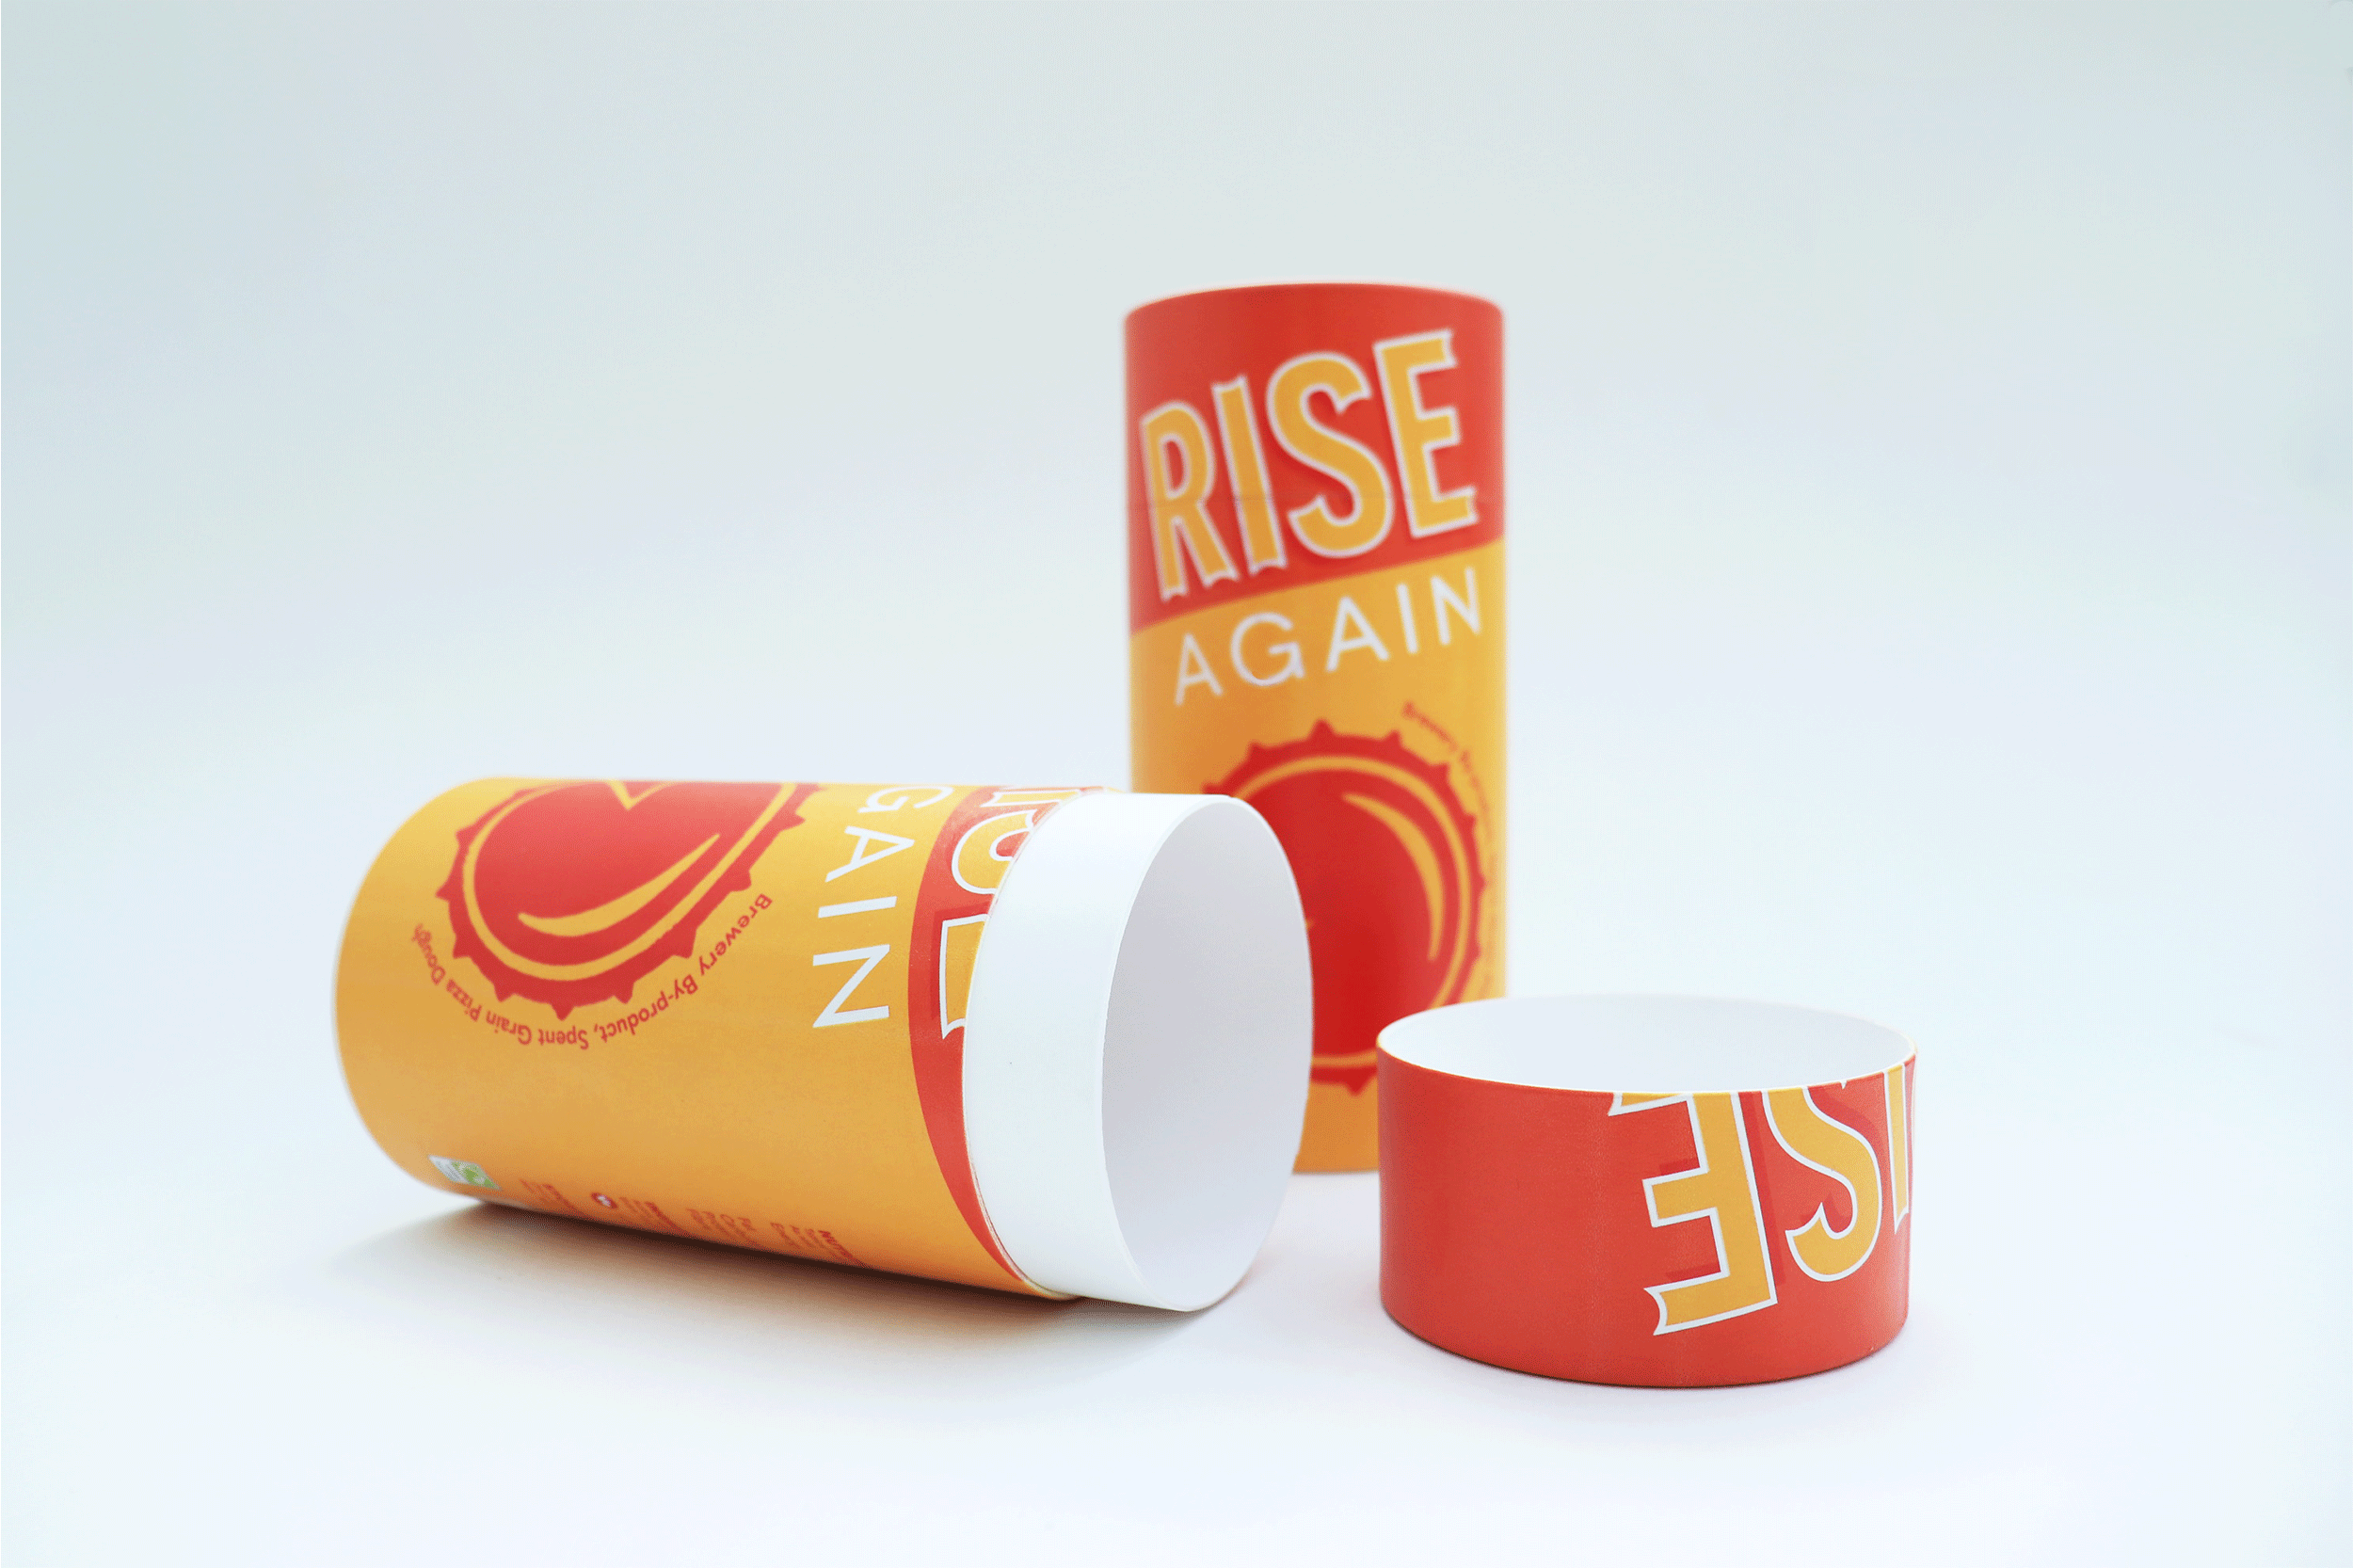 Graphic Design Packaging by Maika Elsley Medina, showing 2-cylinder packages in a bold red and yellow colour, featuring a upward sloping typeface spelling 'Rise Again' and a circular bottle cap design with a pizza like slice cut from it, displayed at the front.